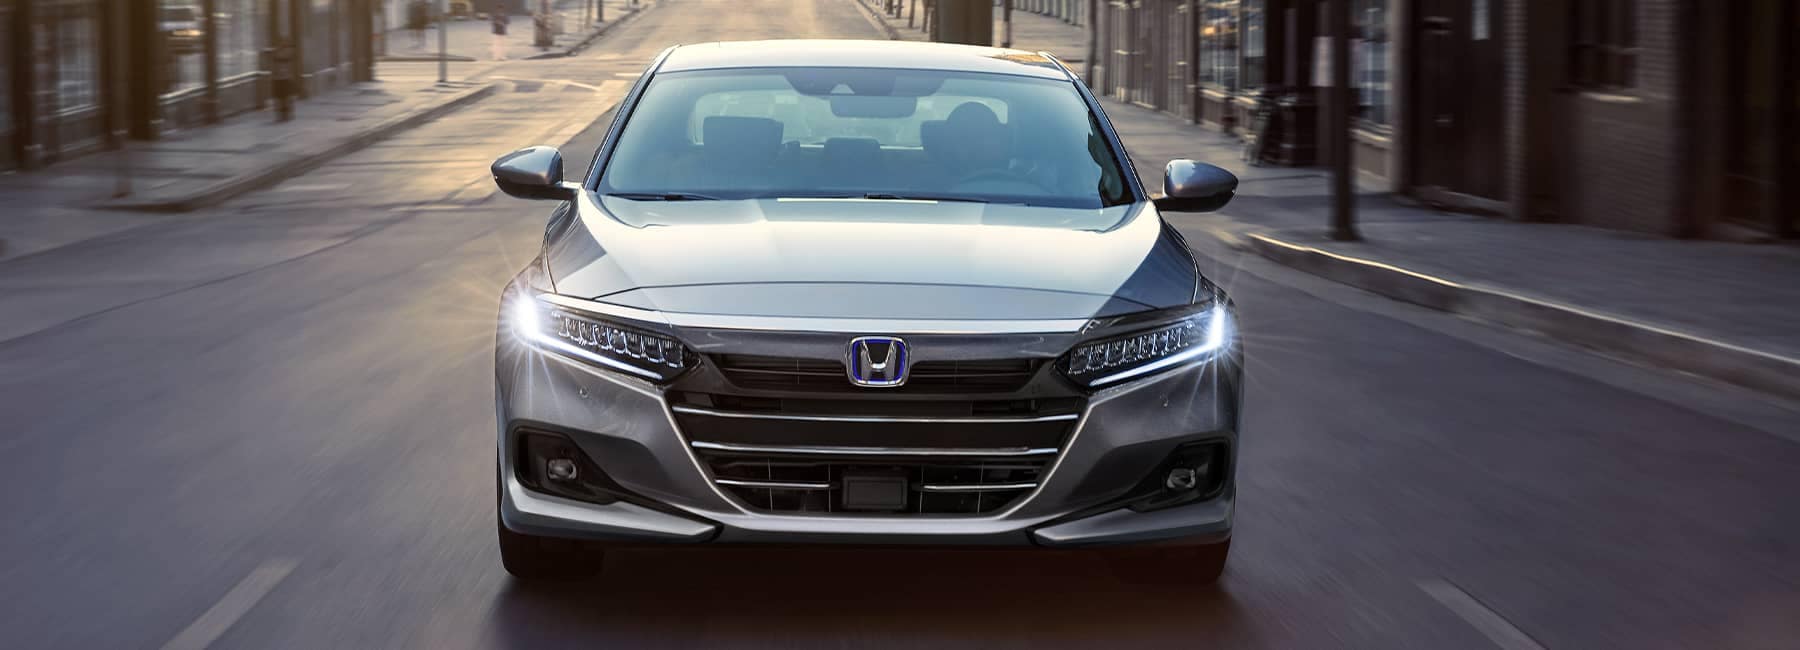 Front angle of a 2021 Silver Honda Accord driving up a city road_mobile